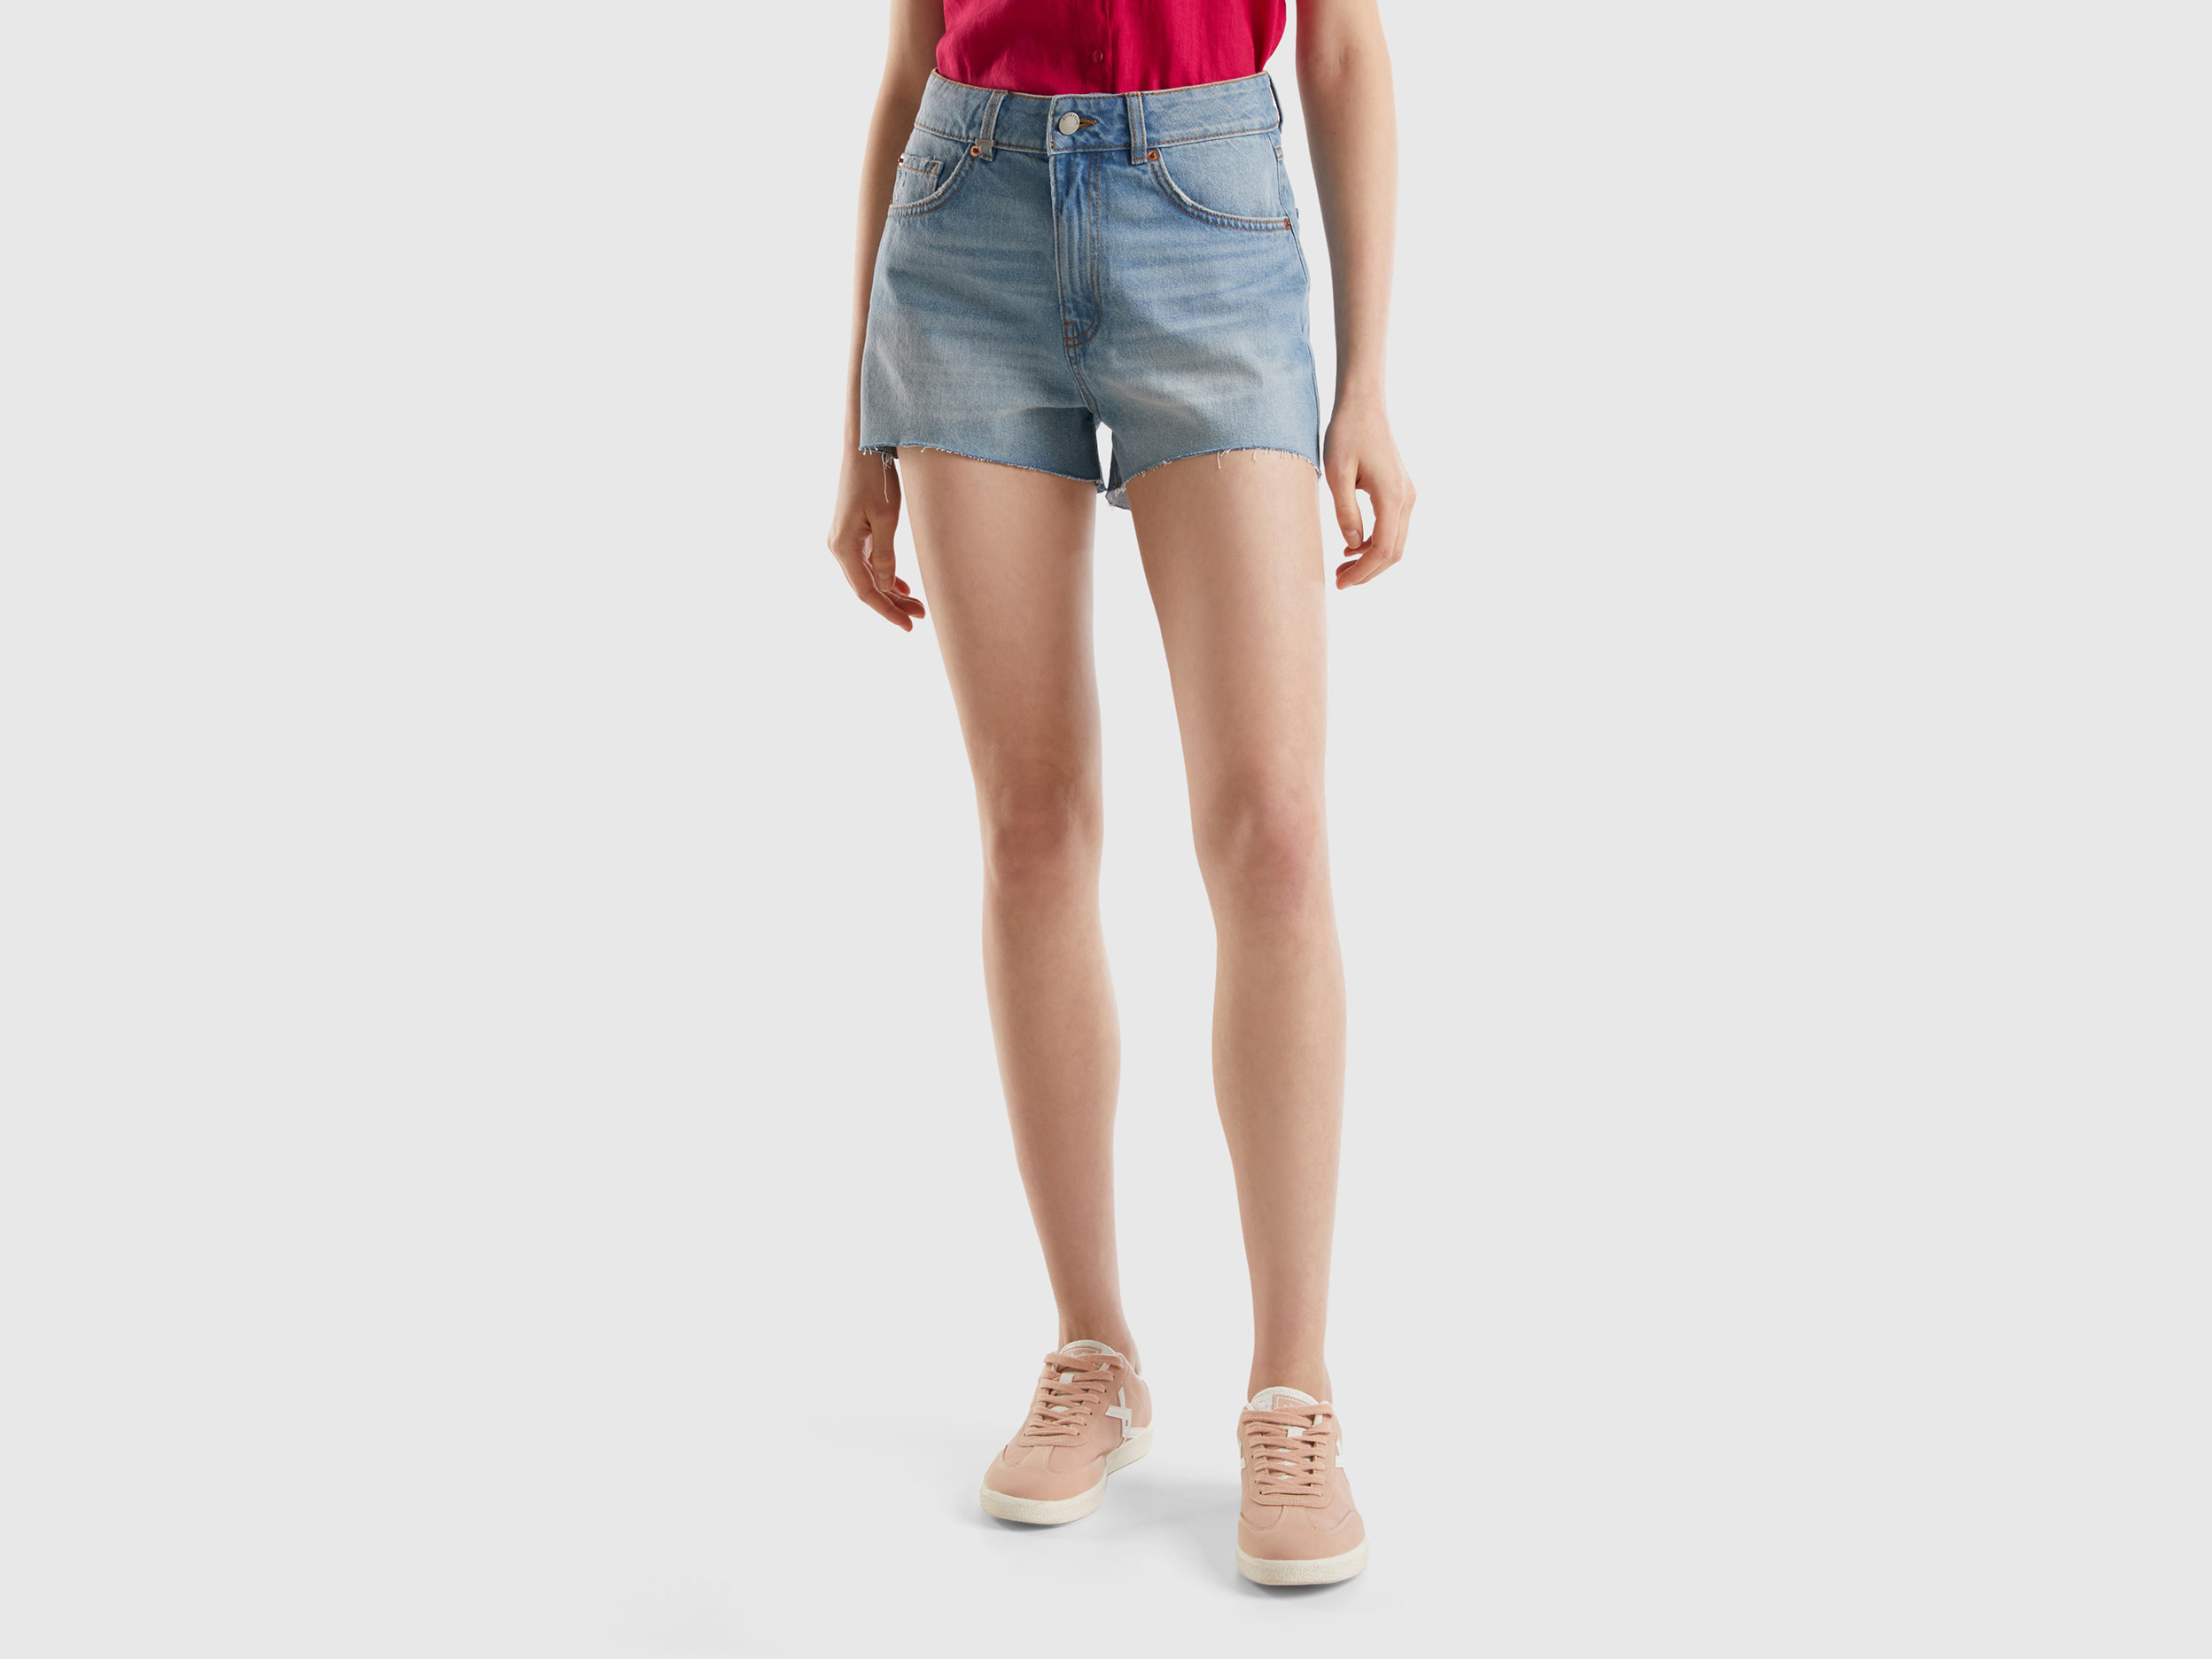 Image of Benetton, Frayed Shorts In Recycled Cotton Blend, size 31, Light Blue, Women